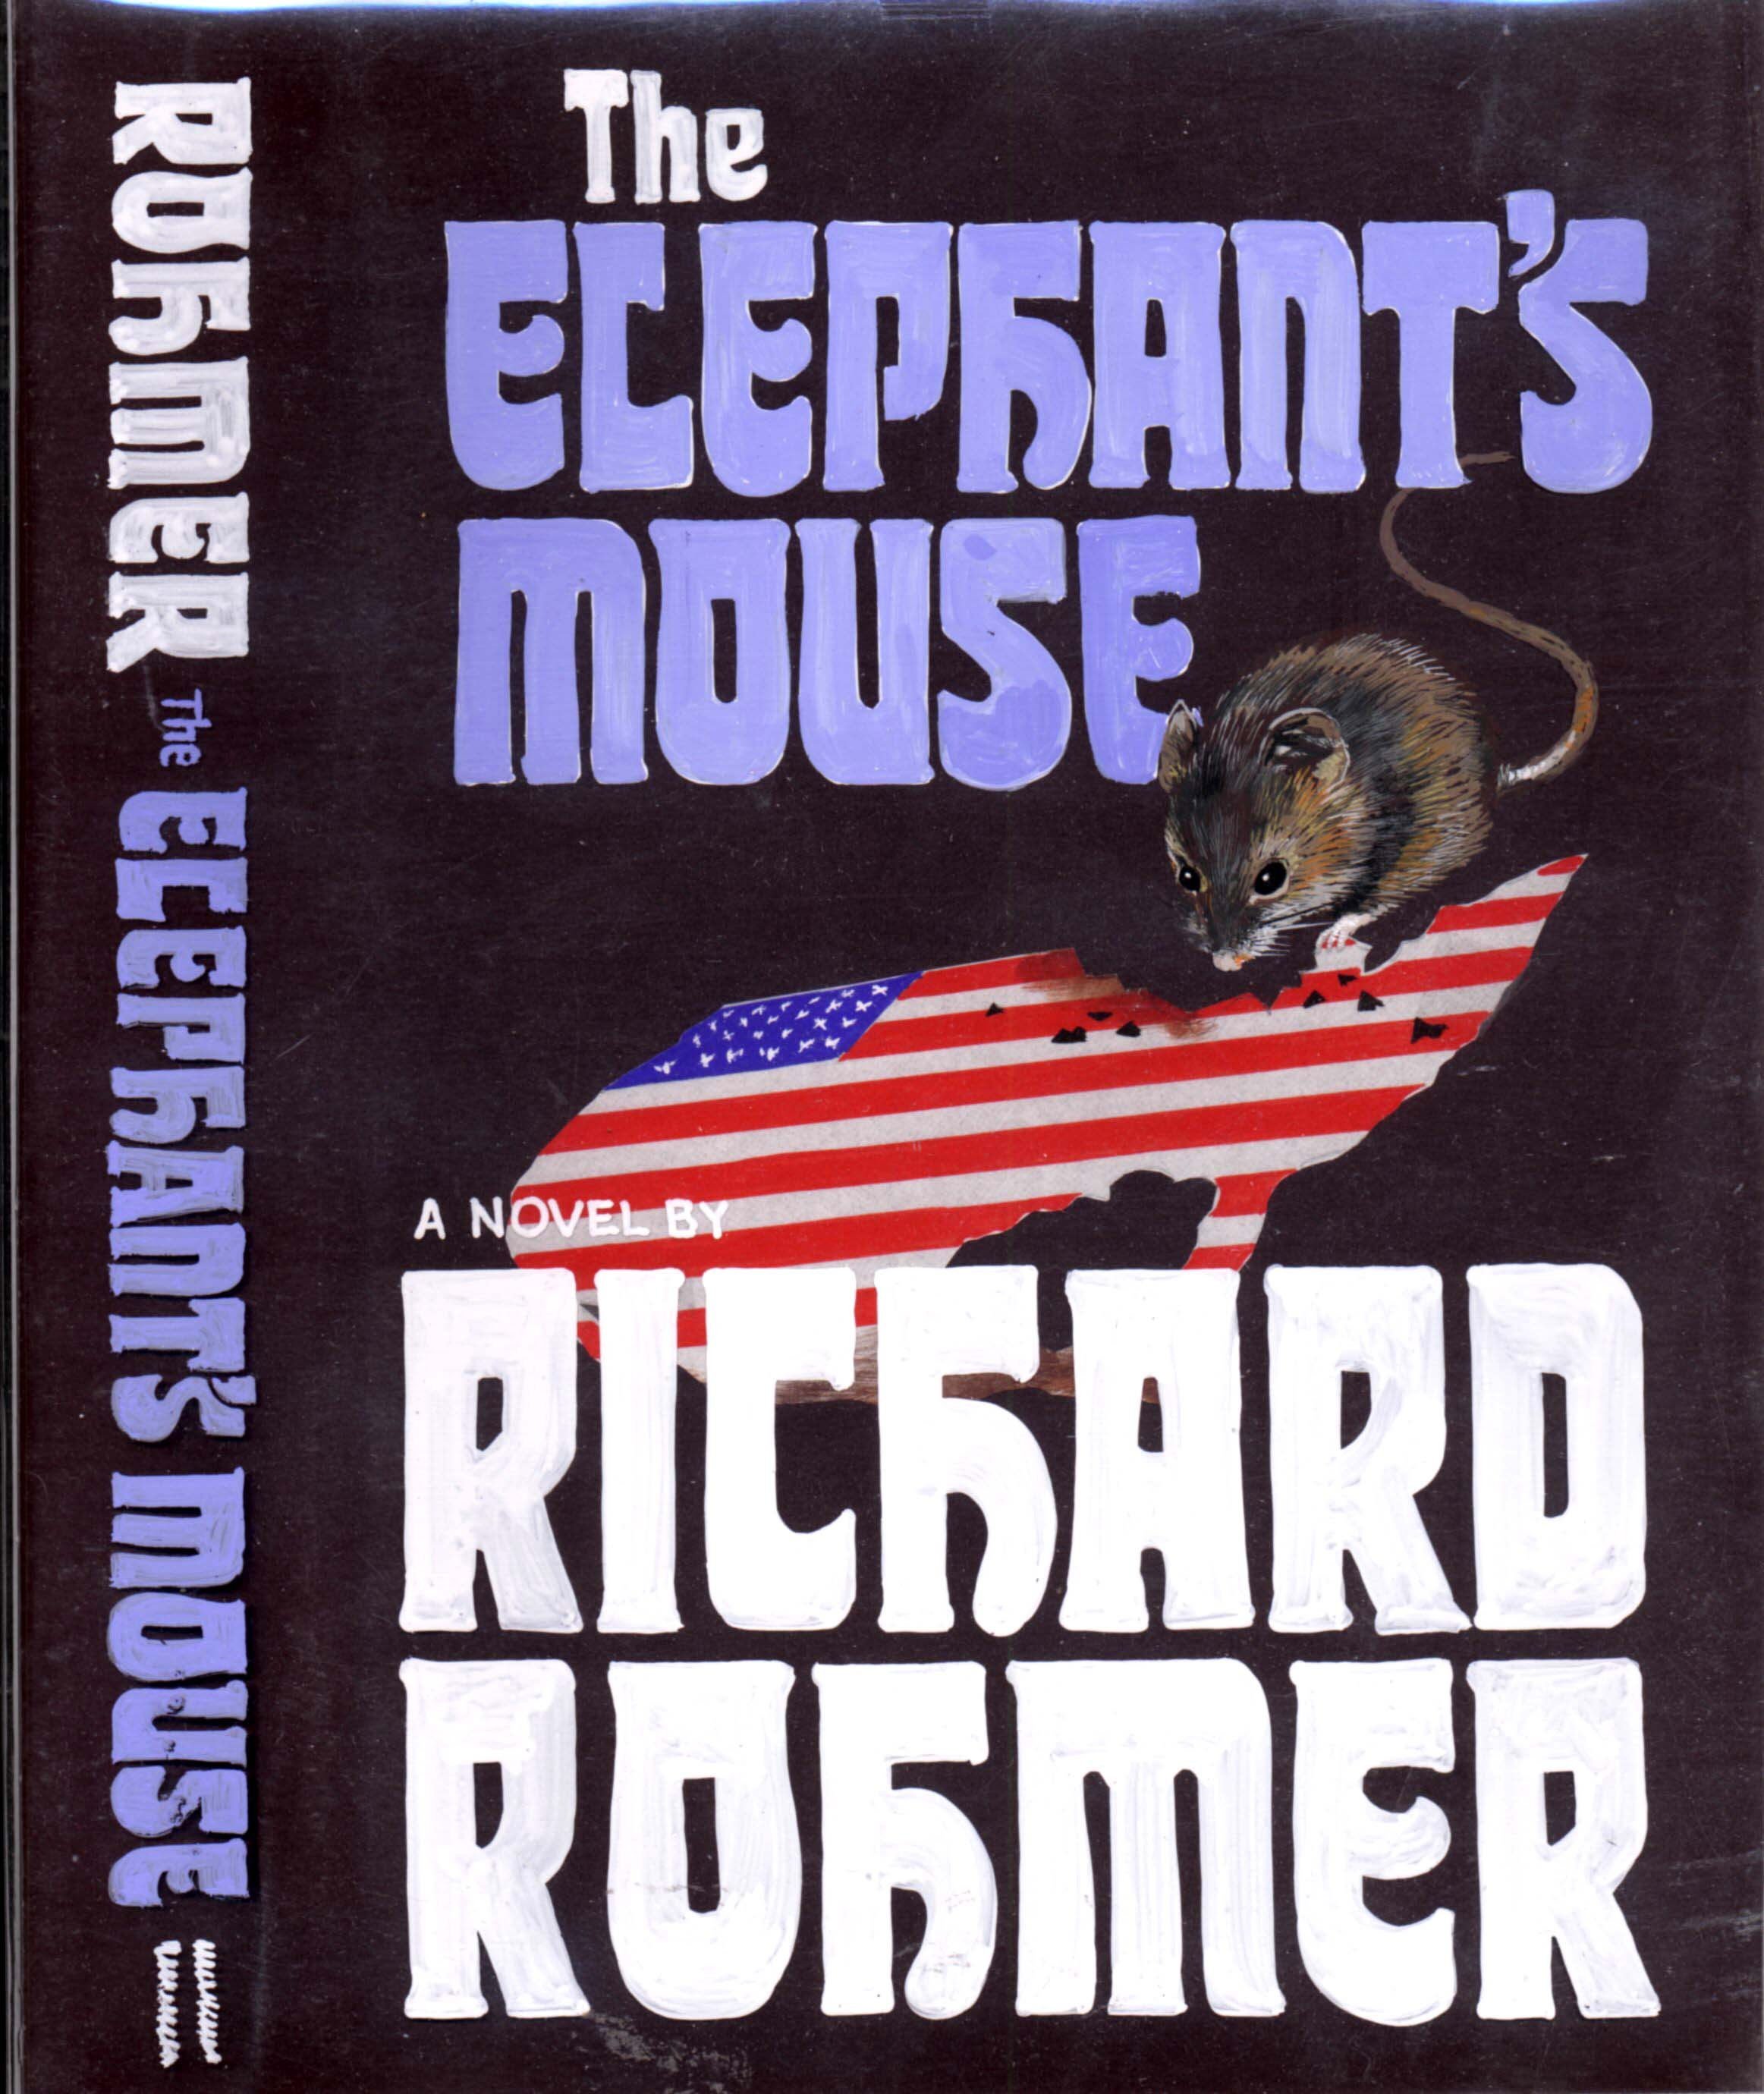 THE ELEPHANT's MOUSE